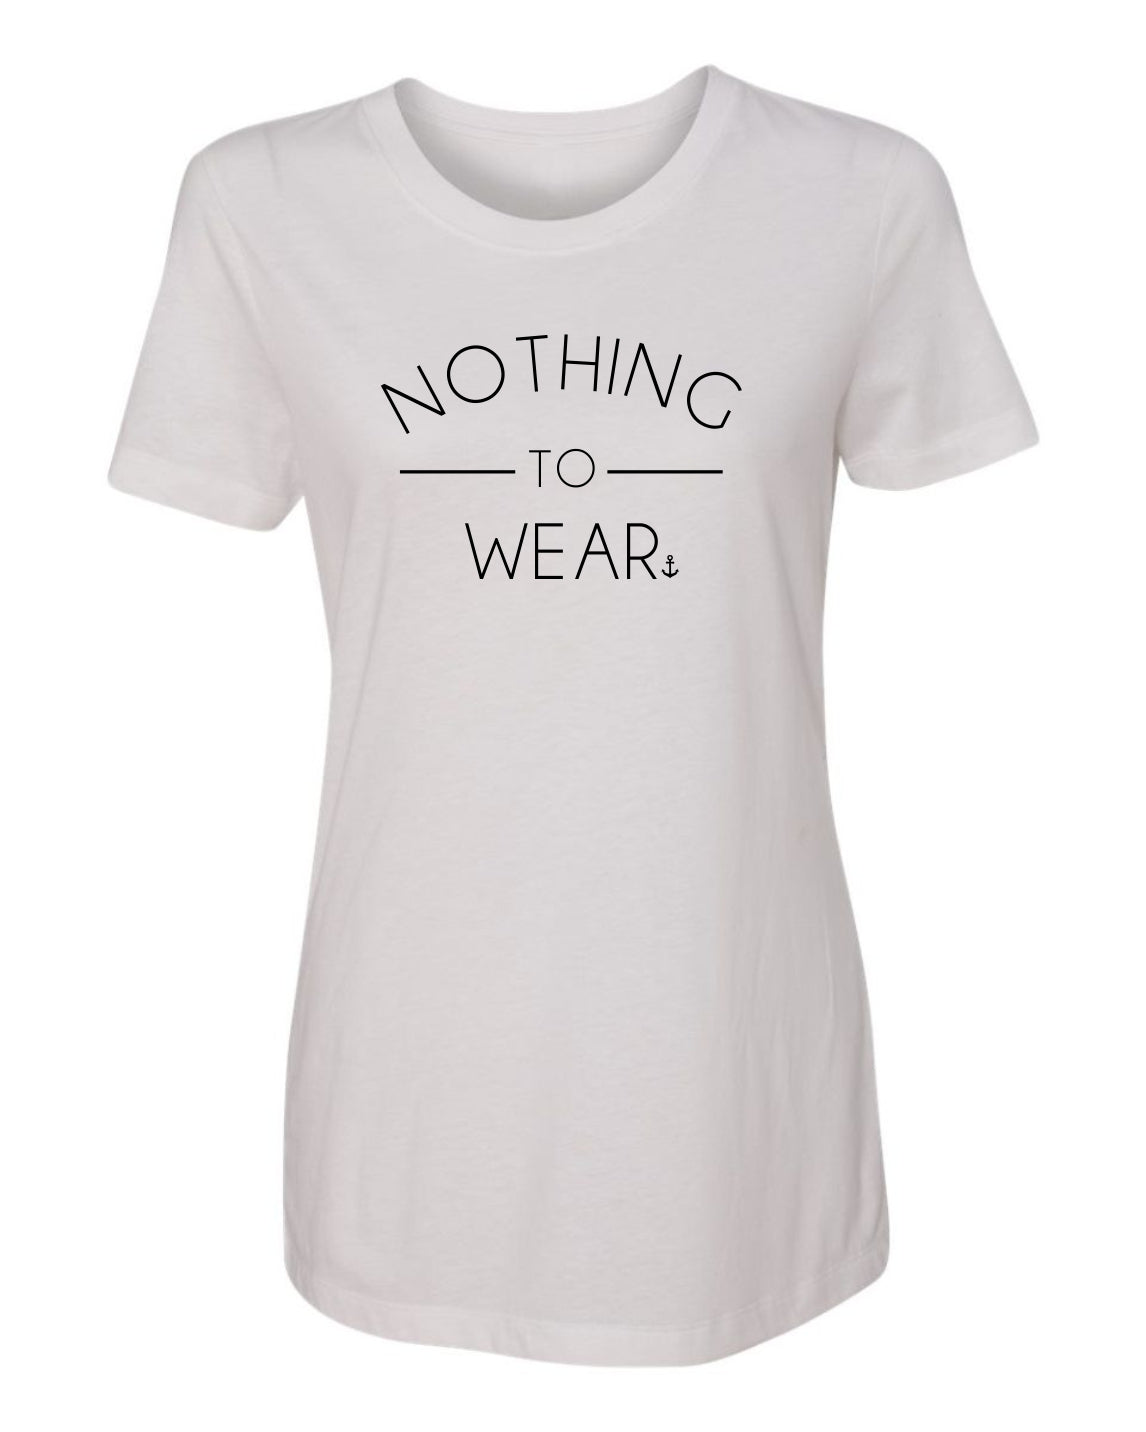 "Nothing To Wear" T-Shirt